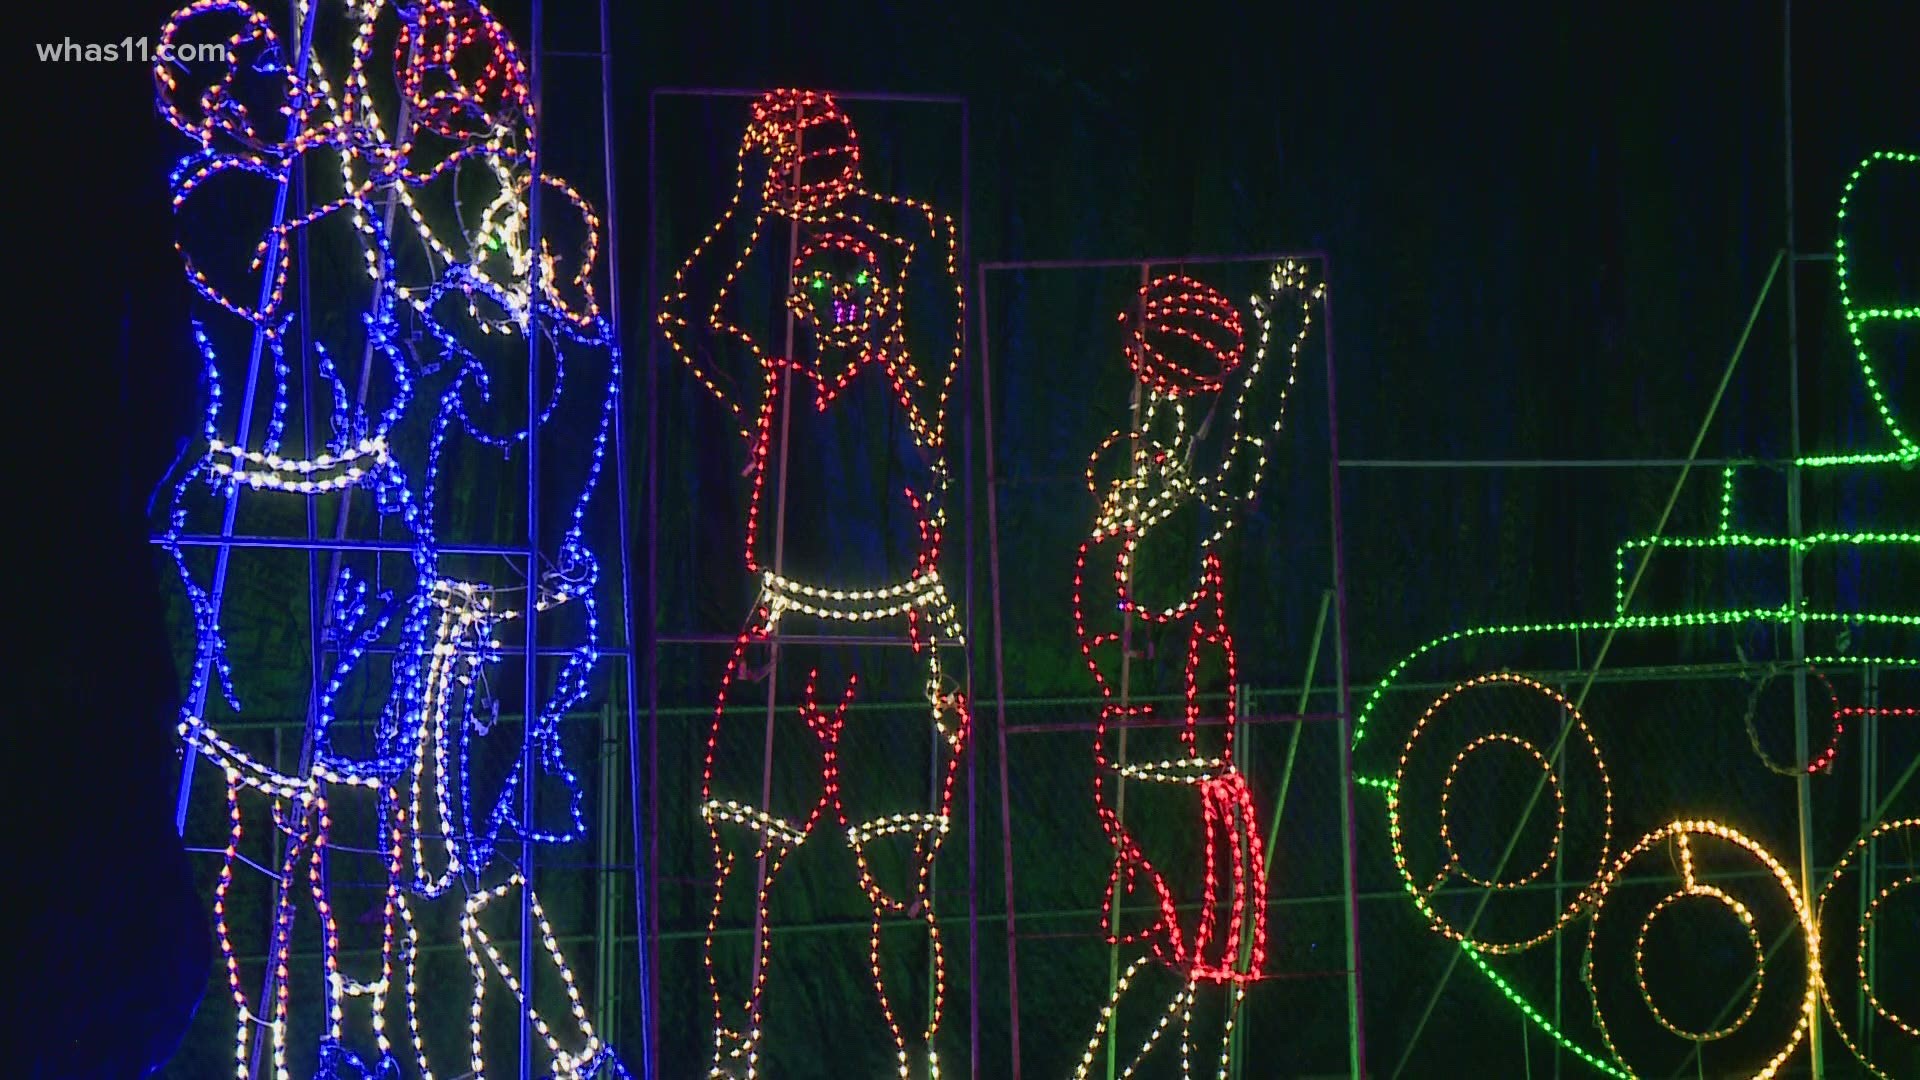 More than 5 million lights will be shown during the underground display at the Louisville Mega Cavern.